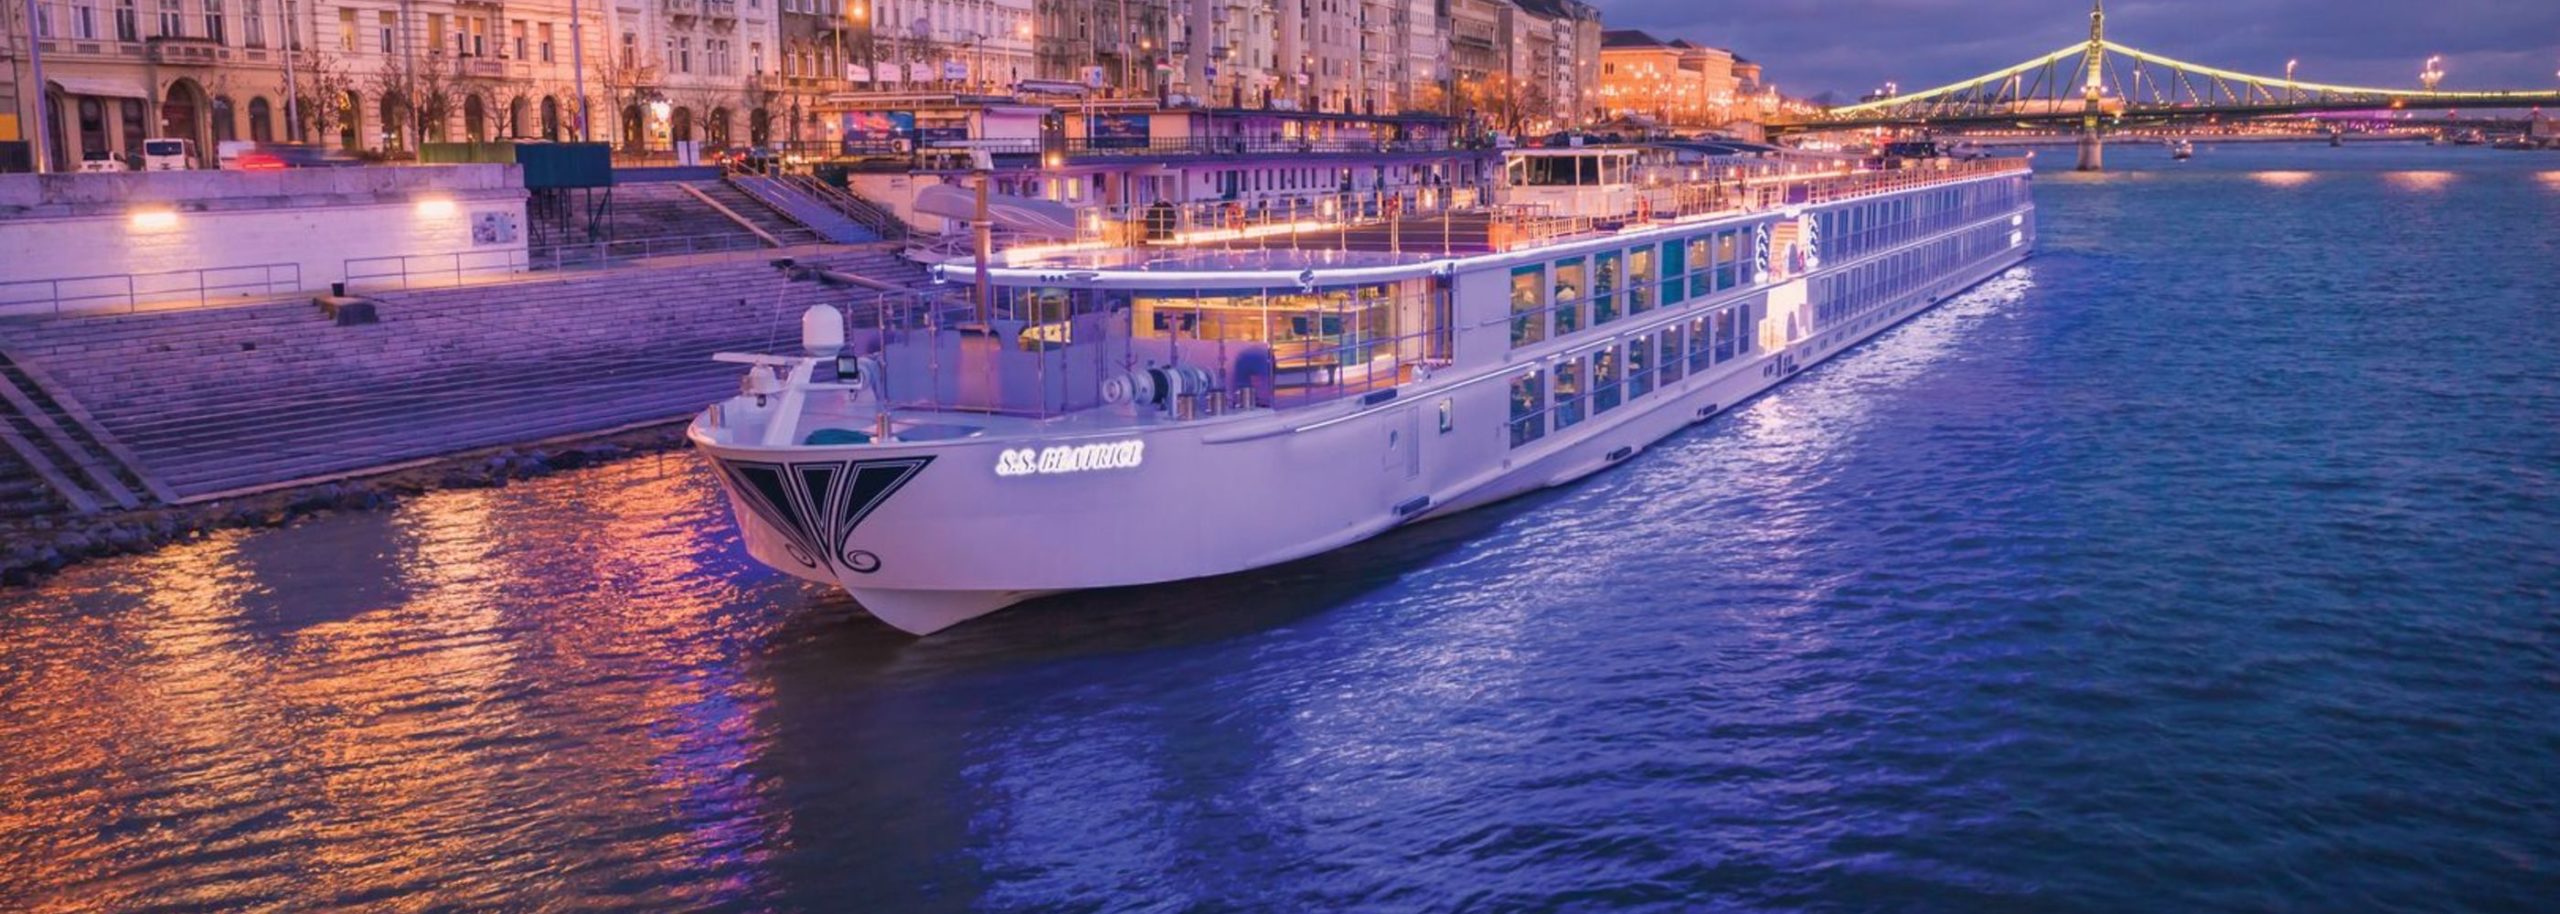 phone number for uniworld river cruises